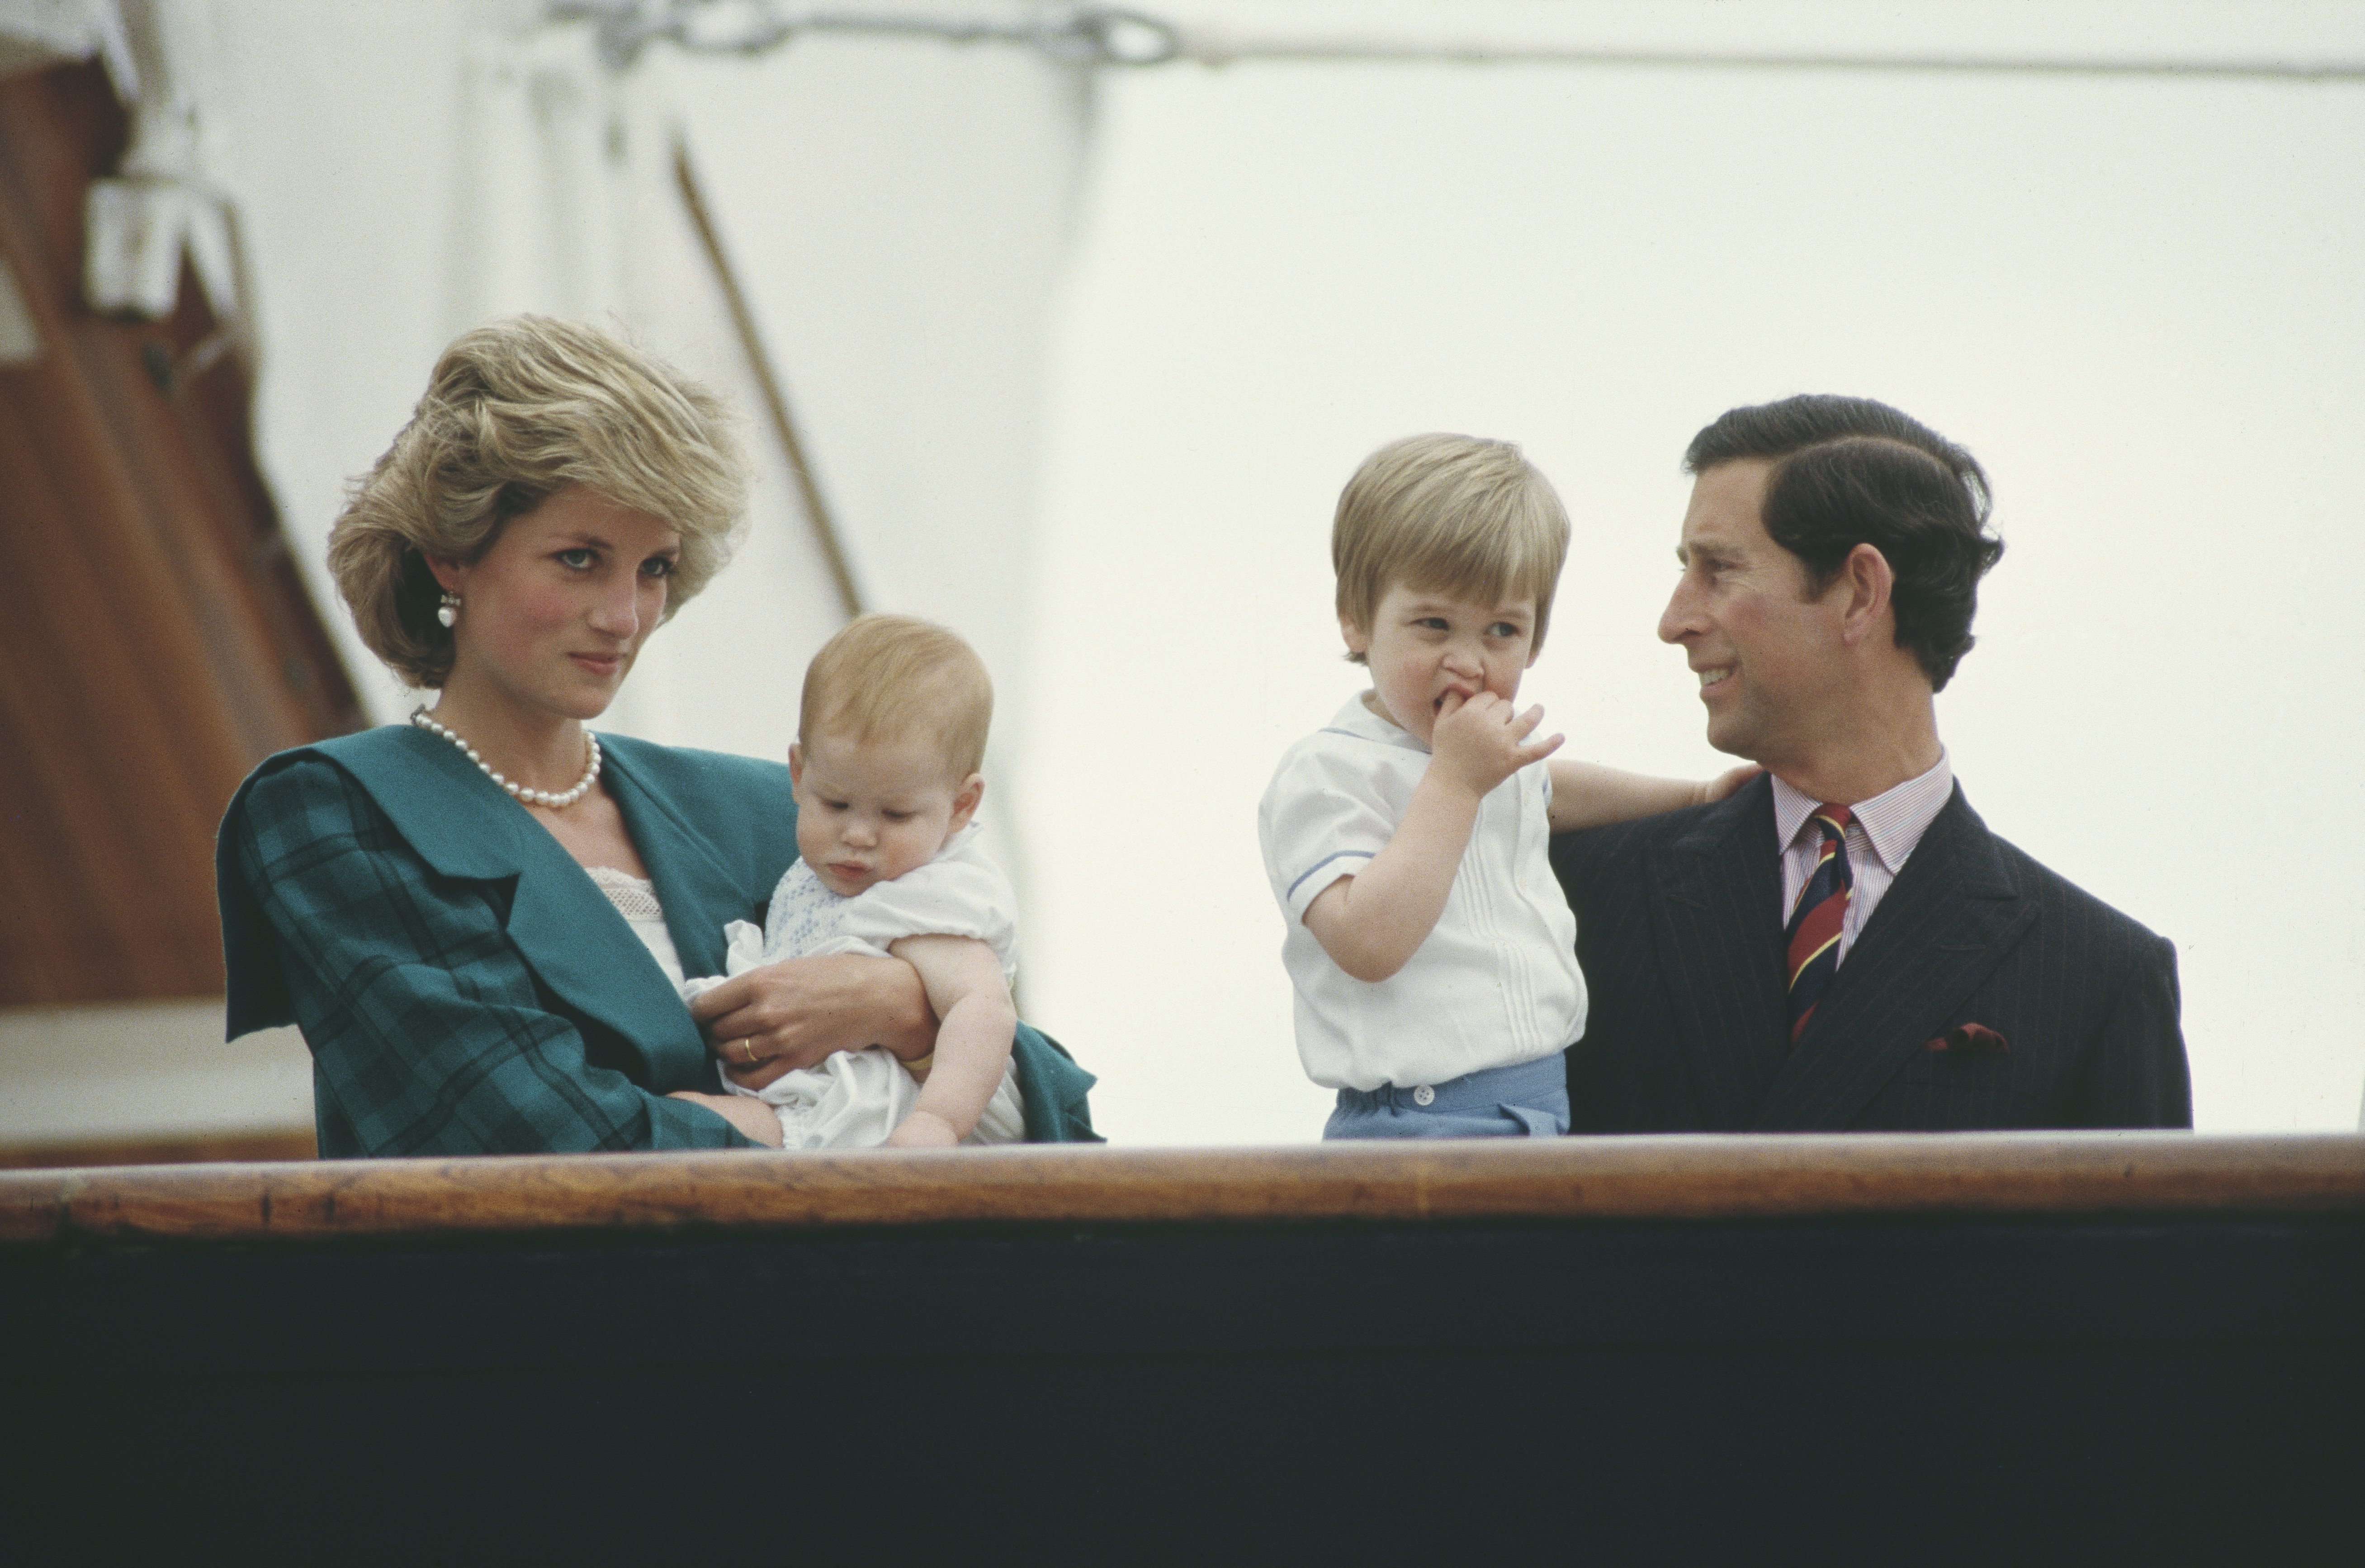 Prince Charles and Diana, Princess of Wales on the royal yacht 'Britannia' with their sons William and Harry during a visit to Venice, Italy, April 1985 | Photo: Getty Images